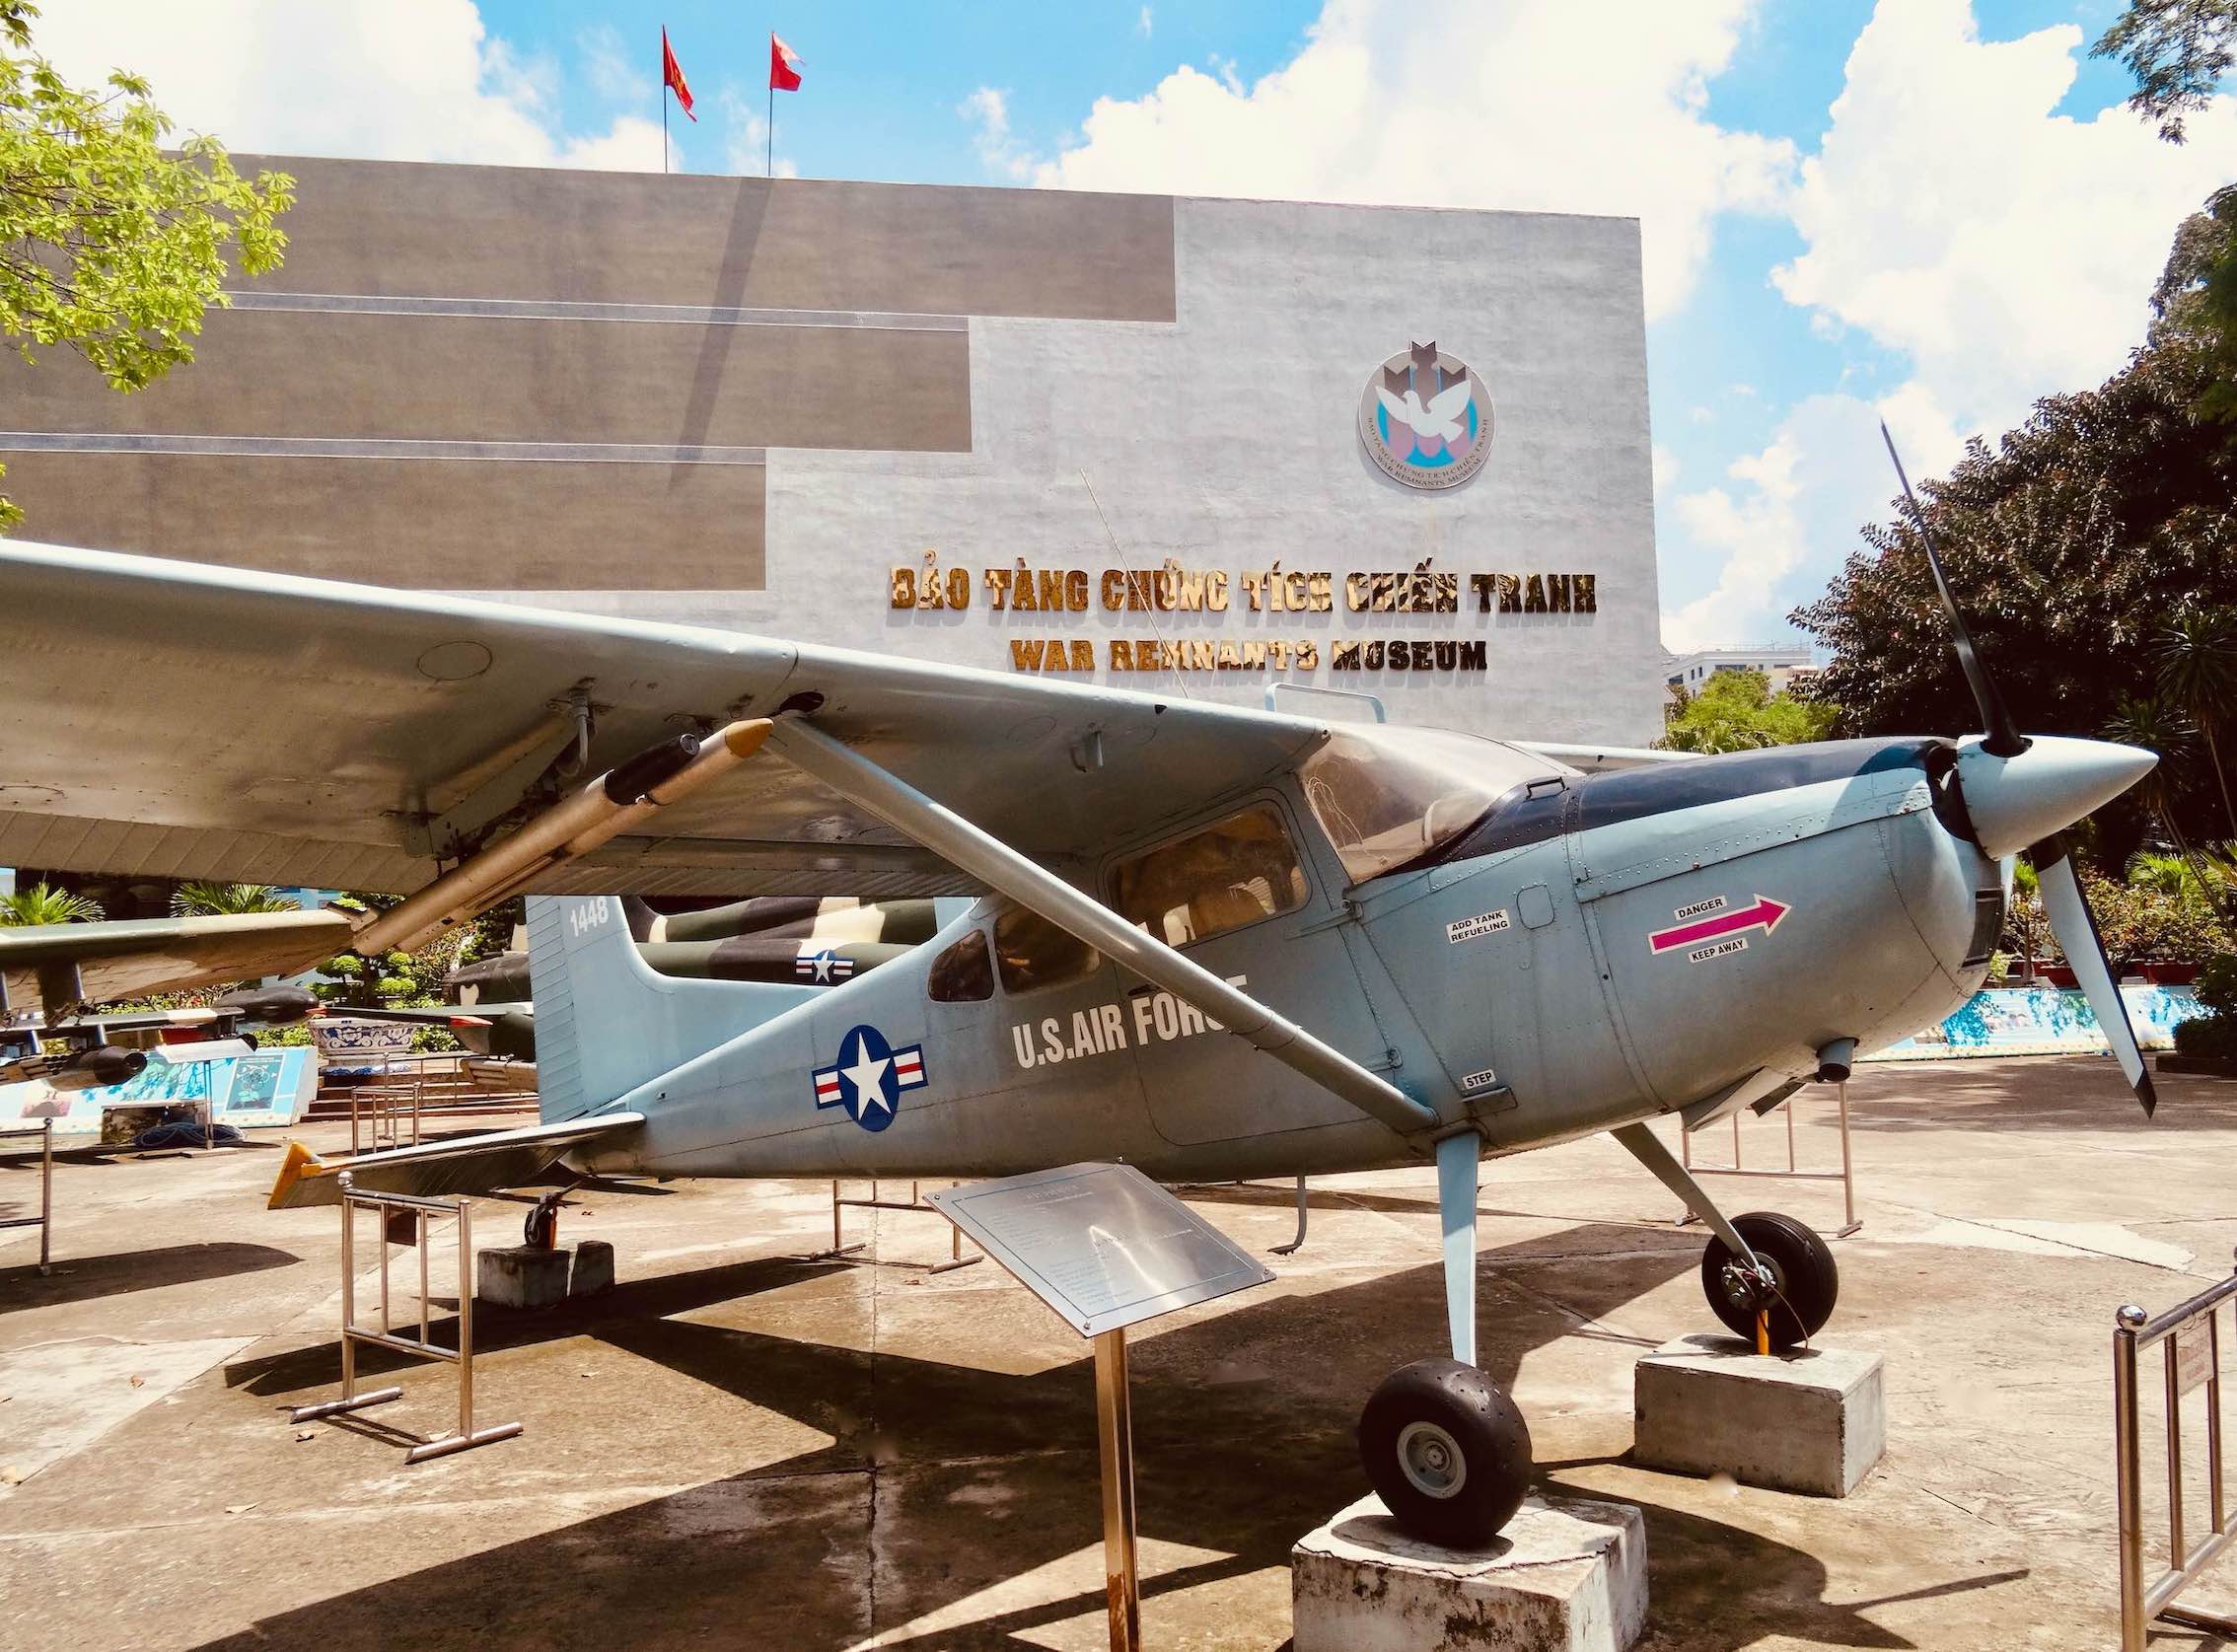 Visit the War Remnants Museum in Ho Chi Minh